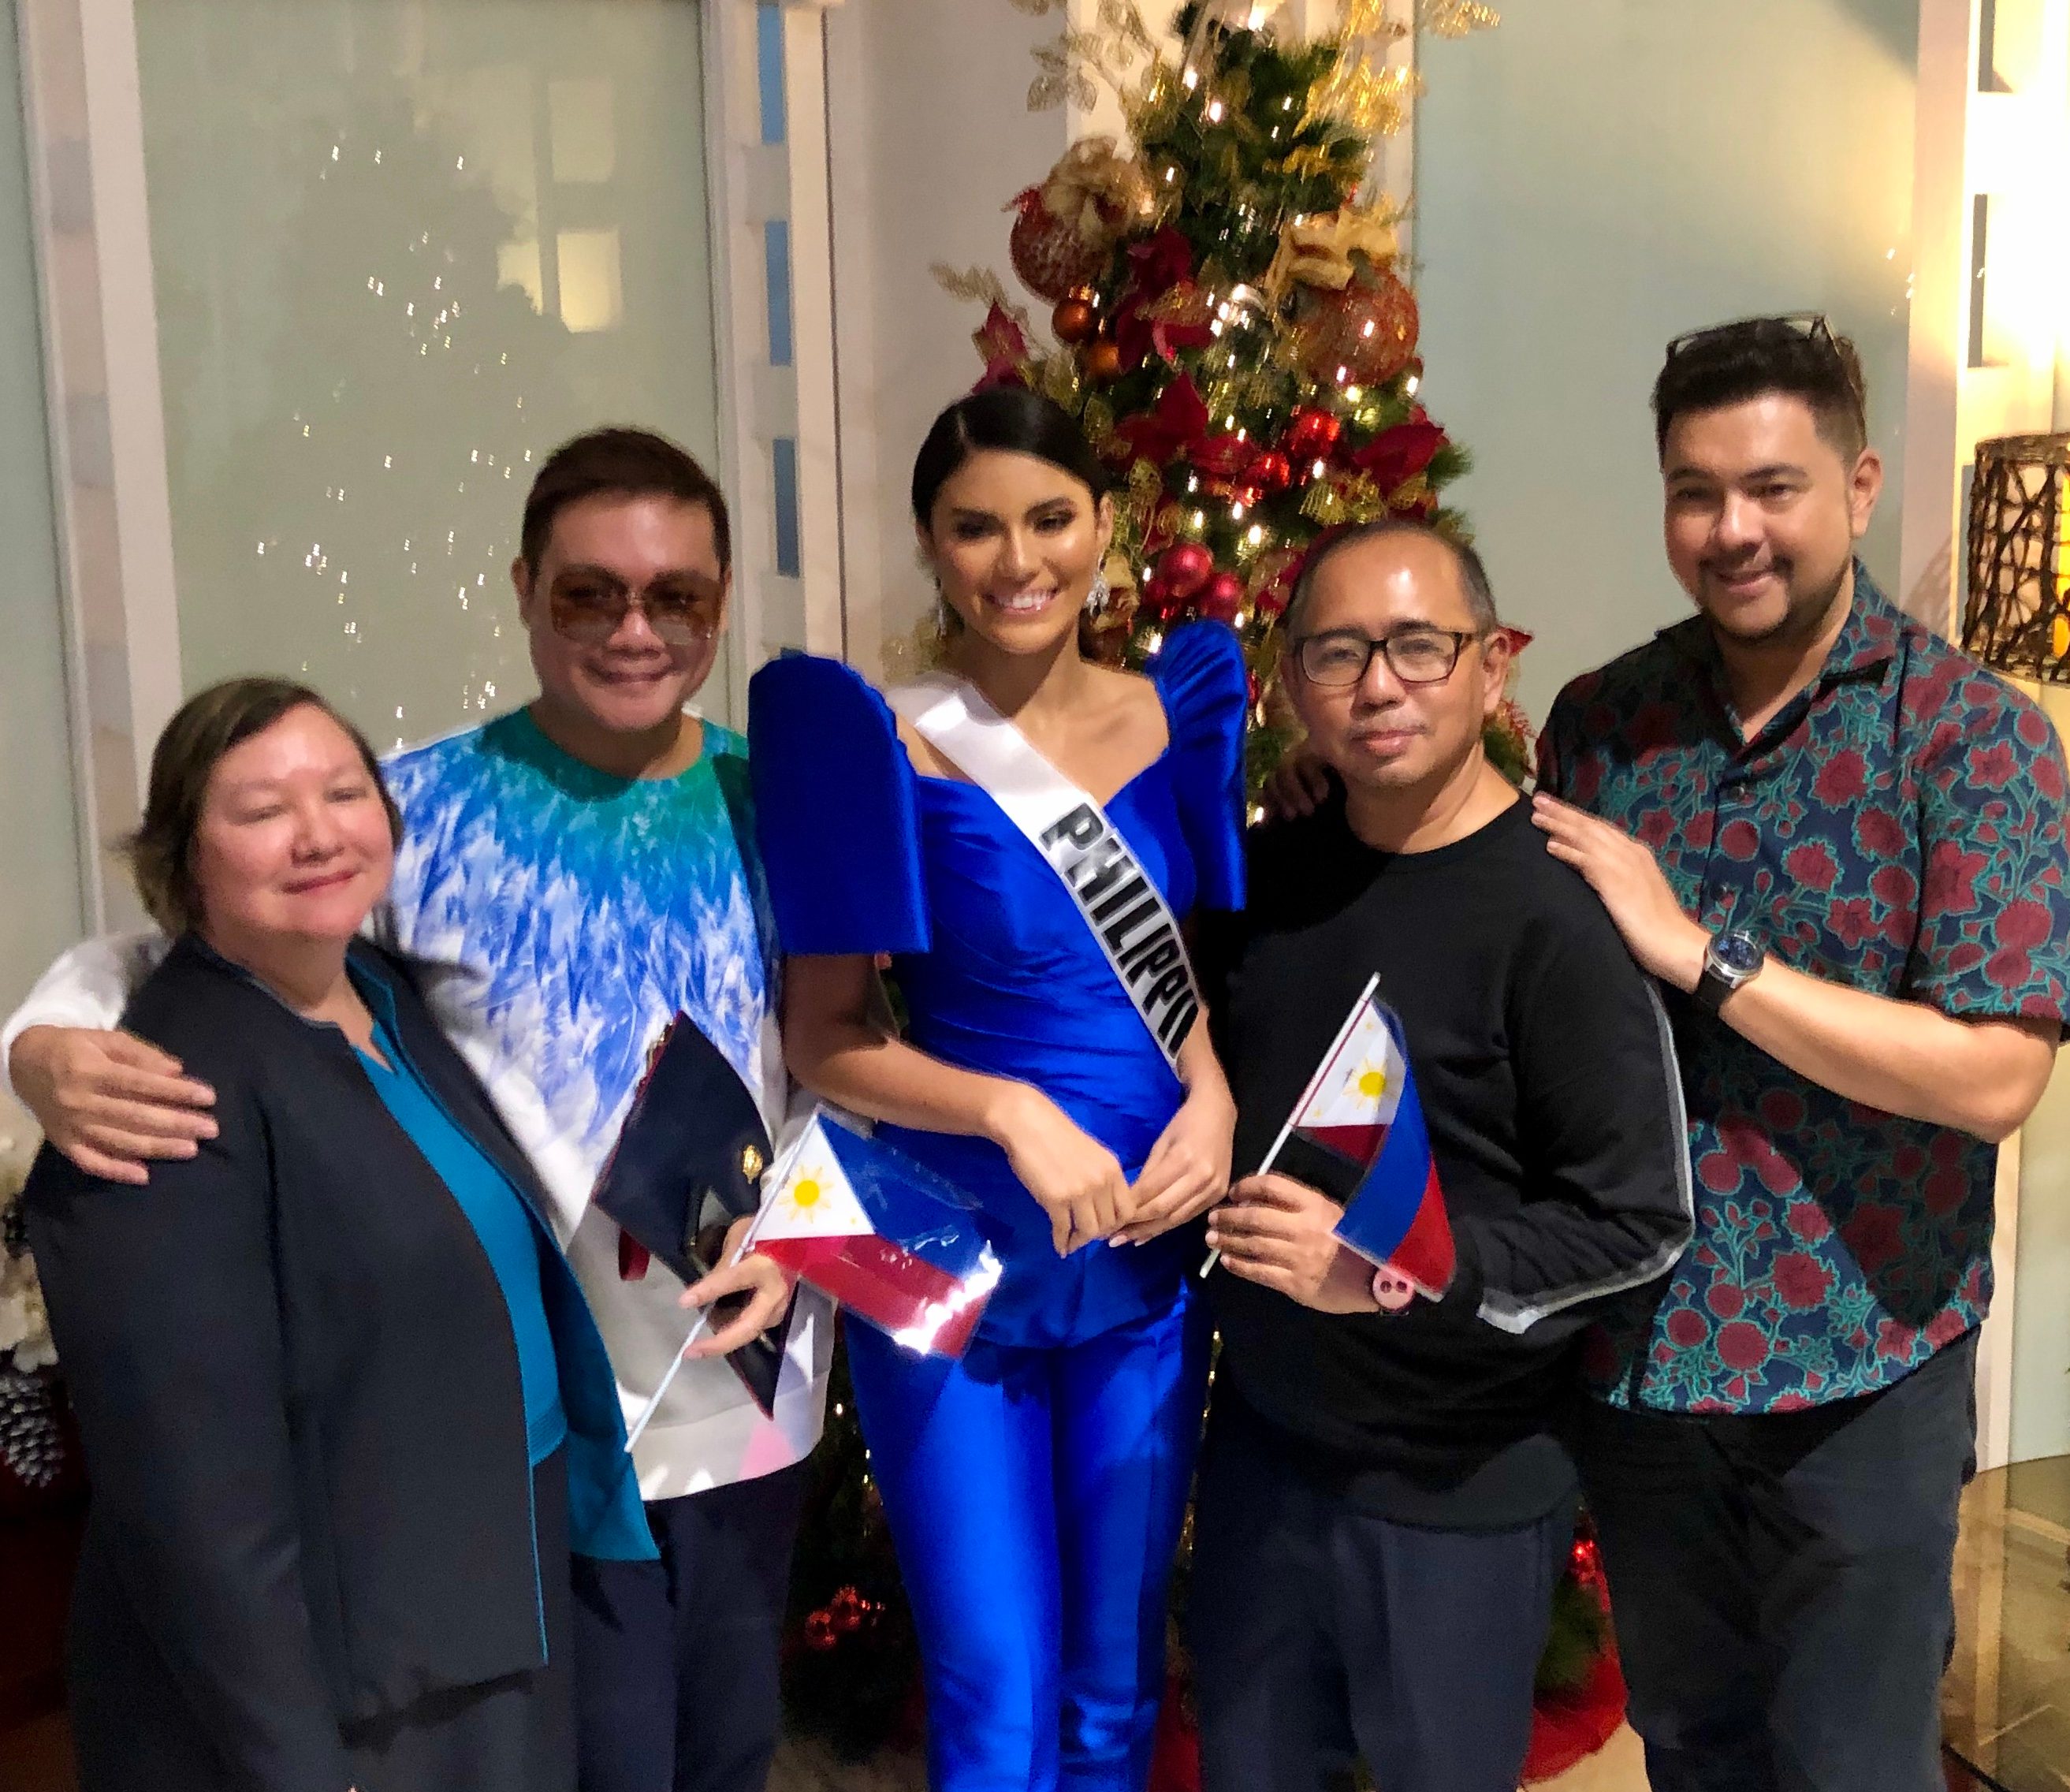 SUPPORT.  Liliana Soriano of BPCI, Jonas Gaffud of Miss Universe Philippines, Gazini Ganados, Rodgil Flores of Kagandahang Flores Camp, and Gines Enriquez of BPCI all came to show a unified front for our country.  